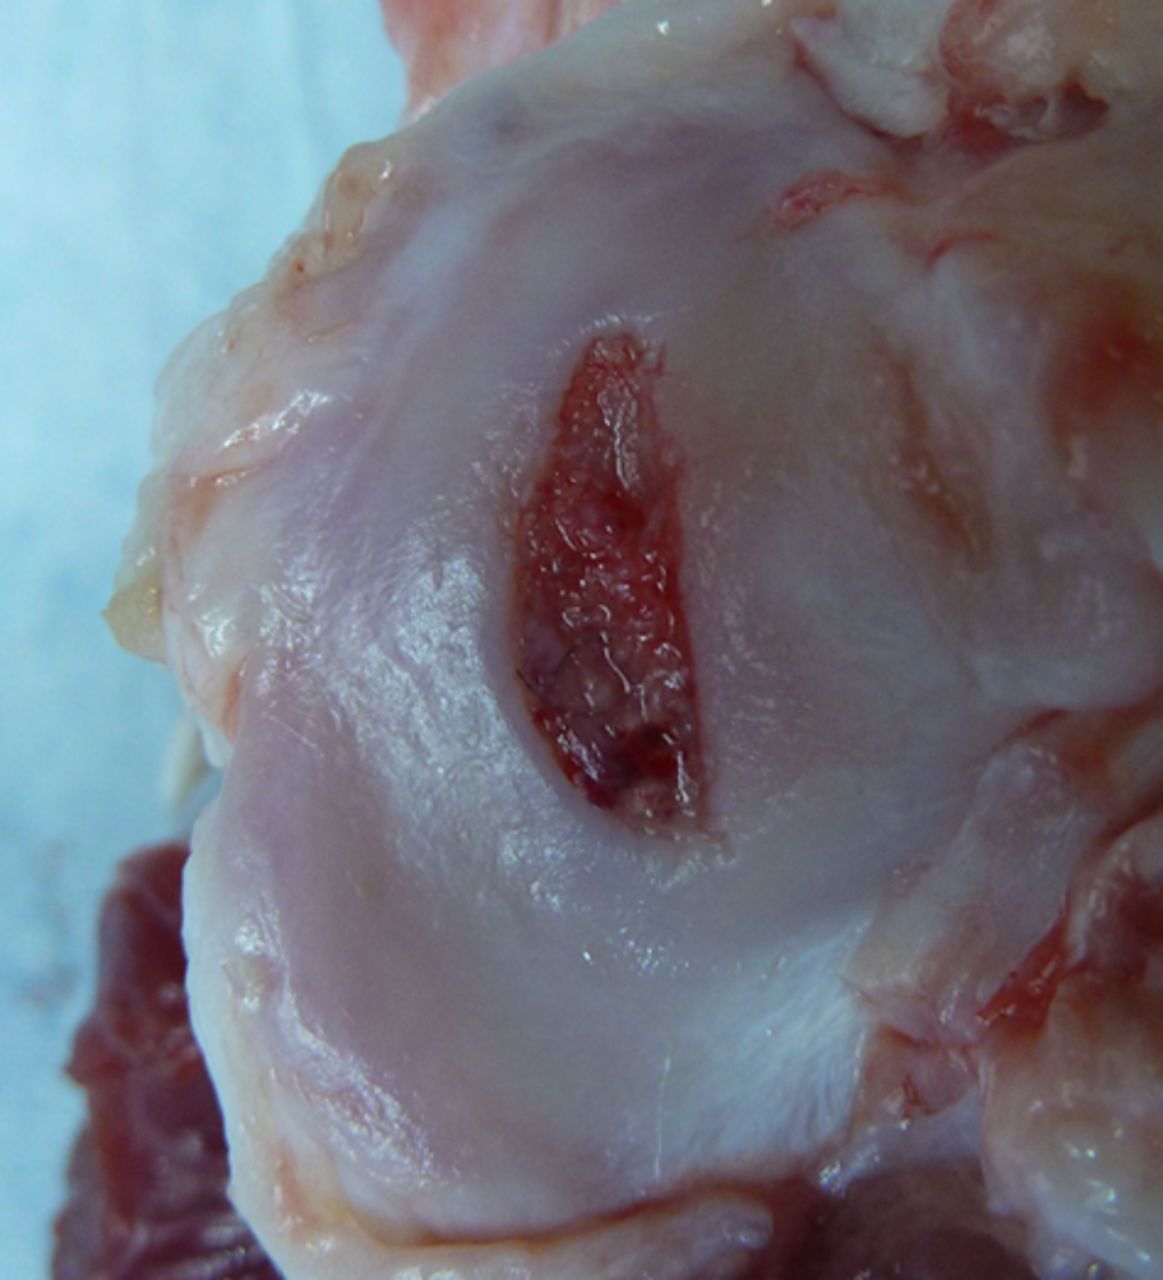 Figs. 3a - 3b 
            Photograph at macroscopic assessment
showing the Asnis screw (Stryker GmbH) fixation a) in the femoral
surface and b) the corresponding tibial surface, showing marked
and deep chondral damage.
          